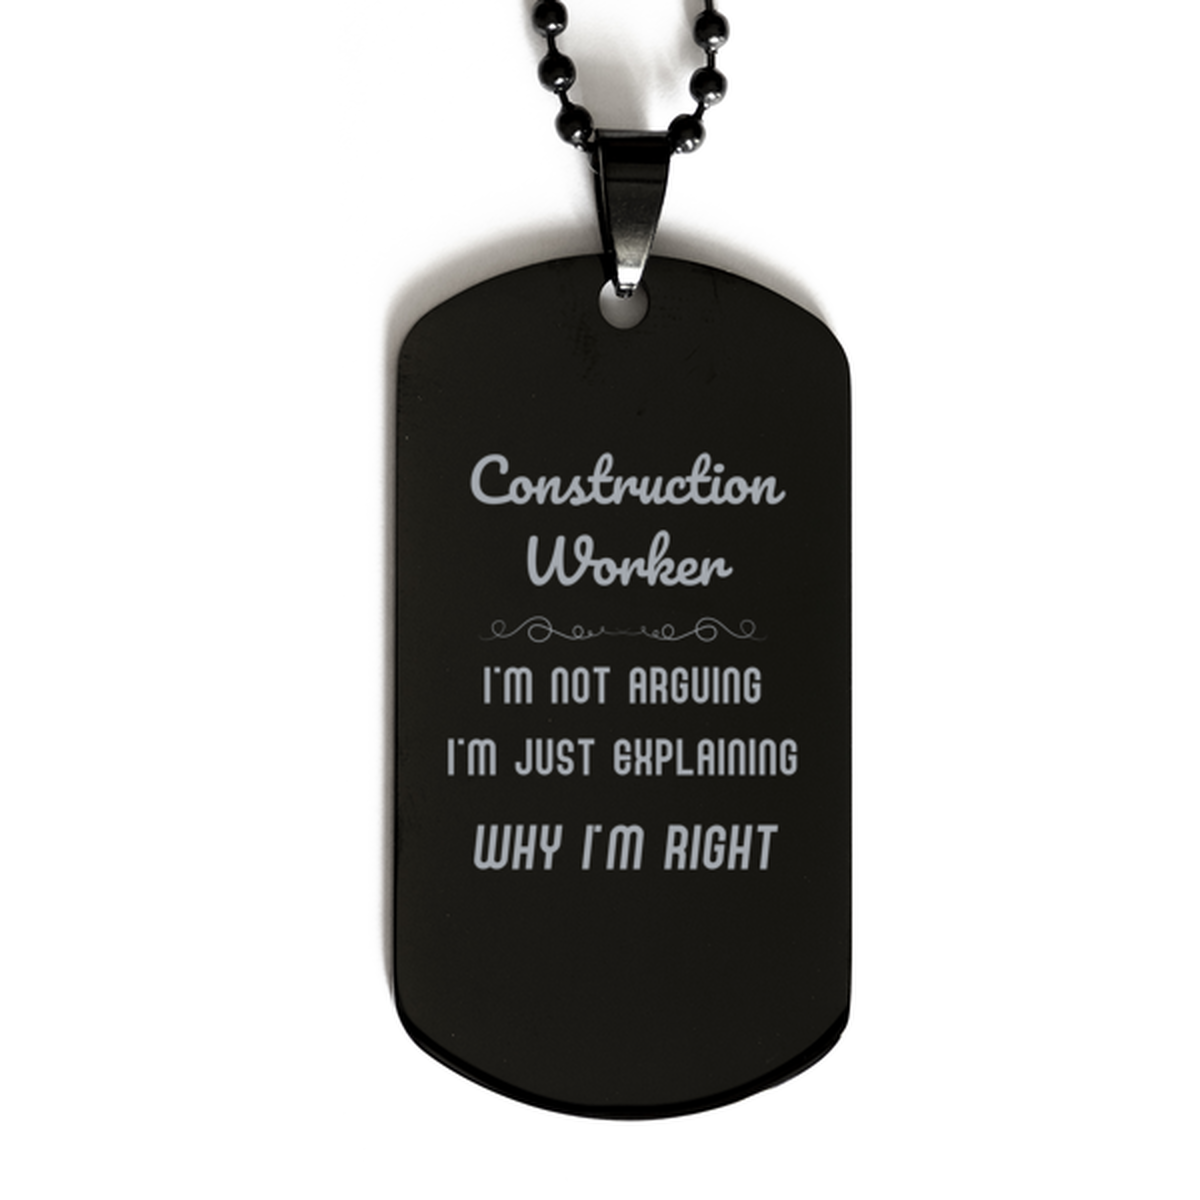 Construction Worker I'm not Arguing. I'm Just Explaining Why I'm RIGHT Black Dog Tag, Funny Saying Quote Construction Worker Gifts For Construction Worker Graduation Birthday Christmas Gifts for Men Women Coworker